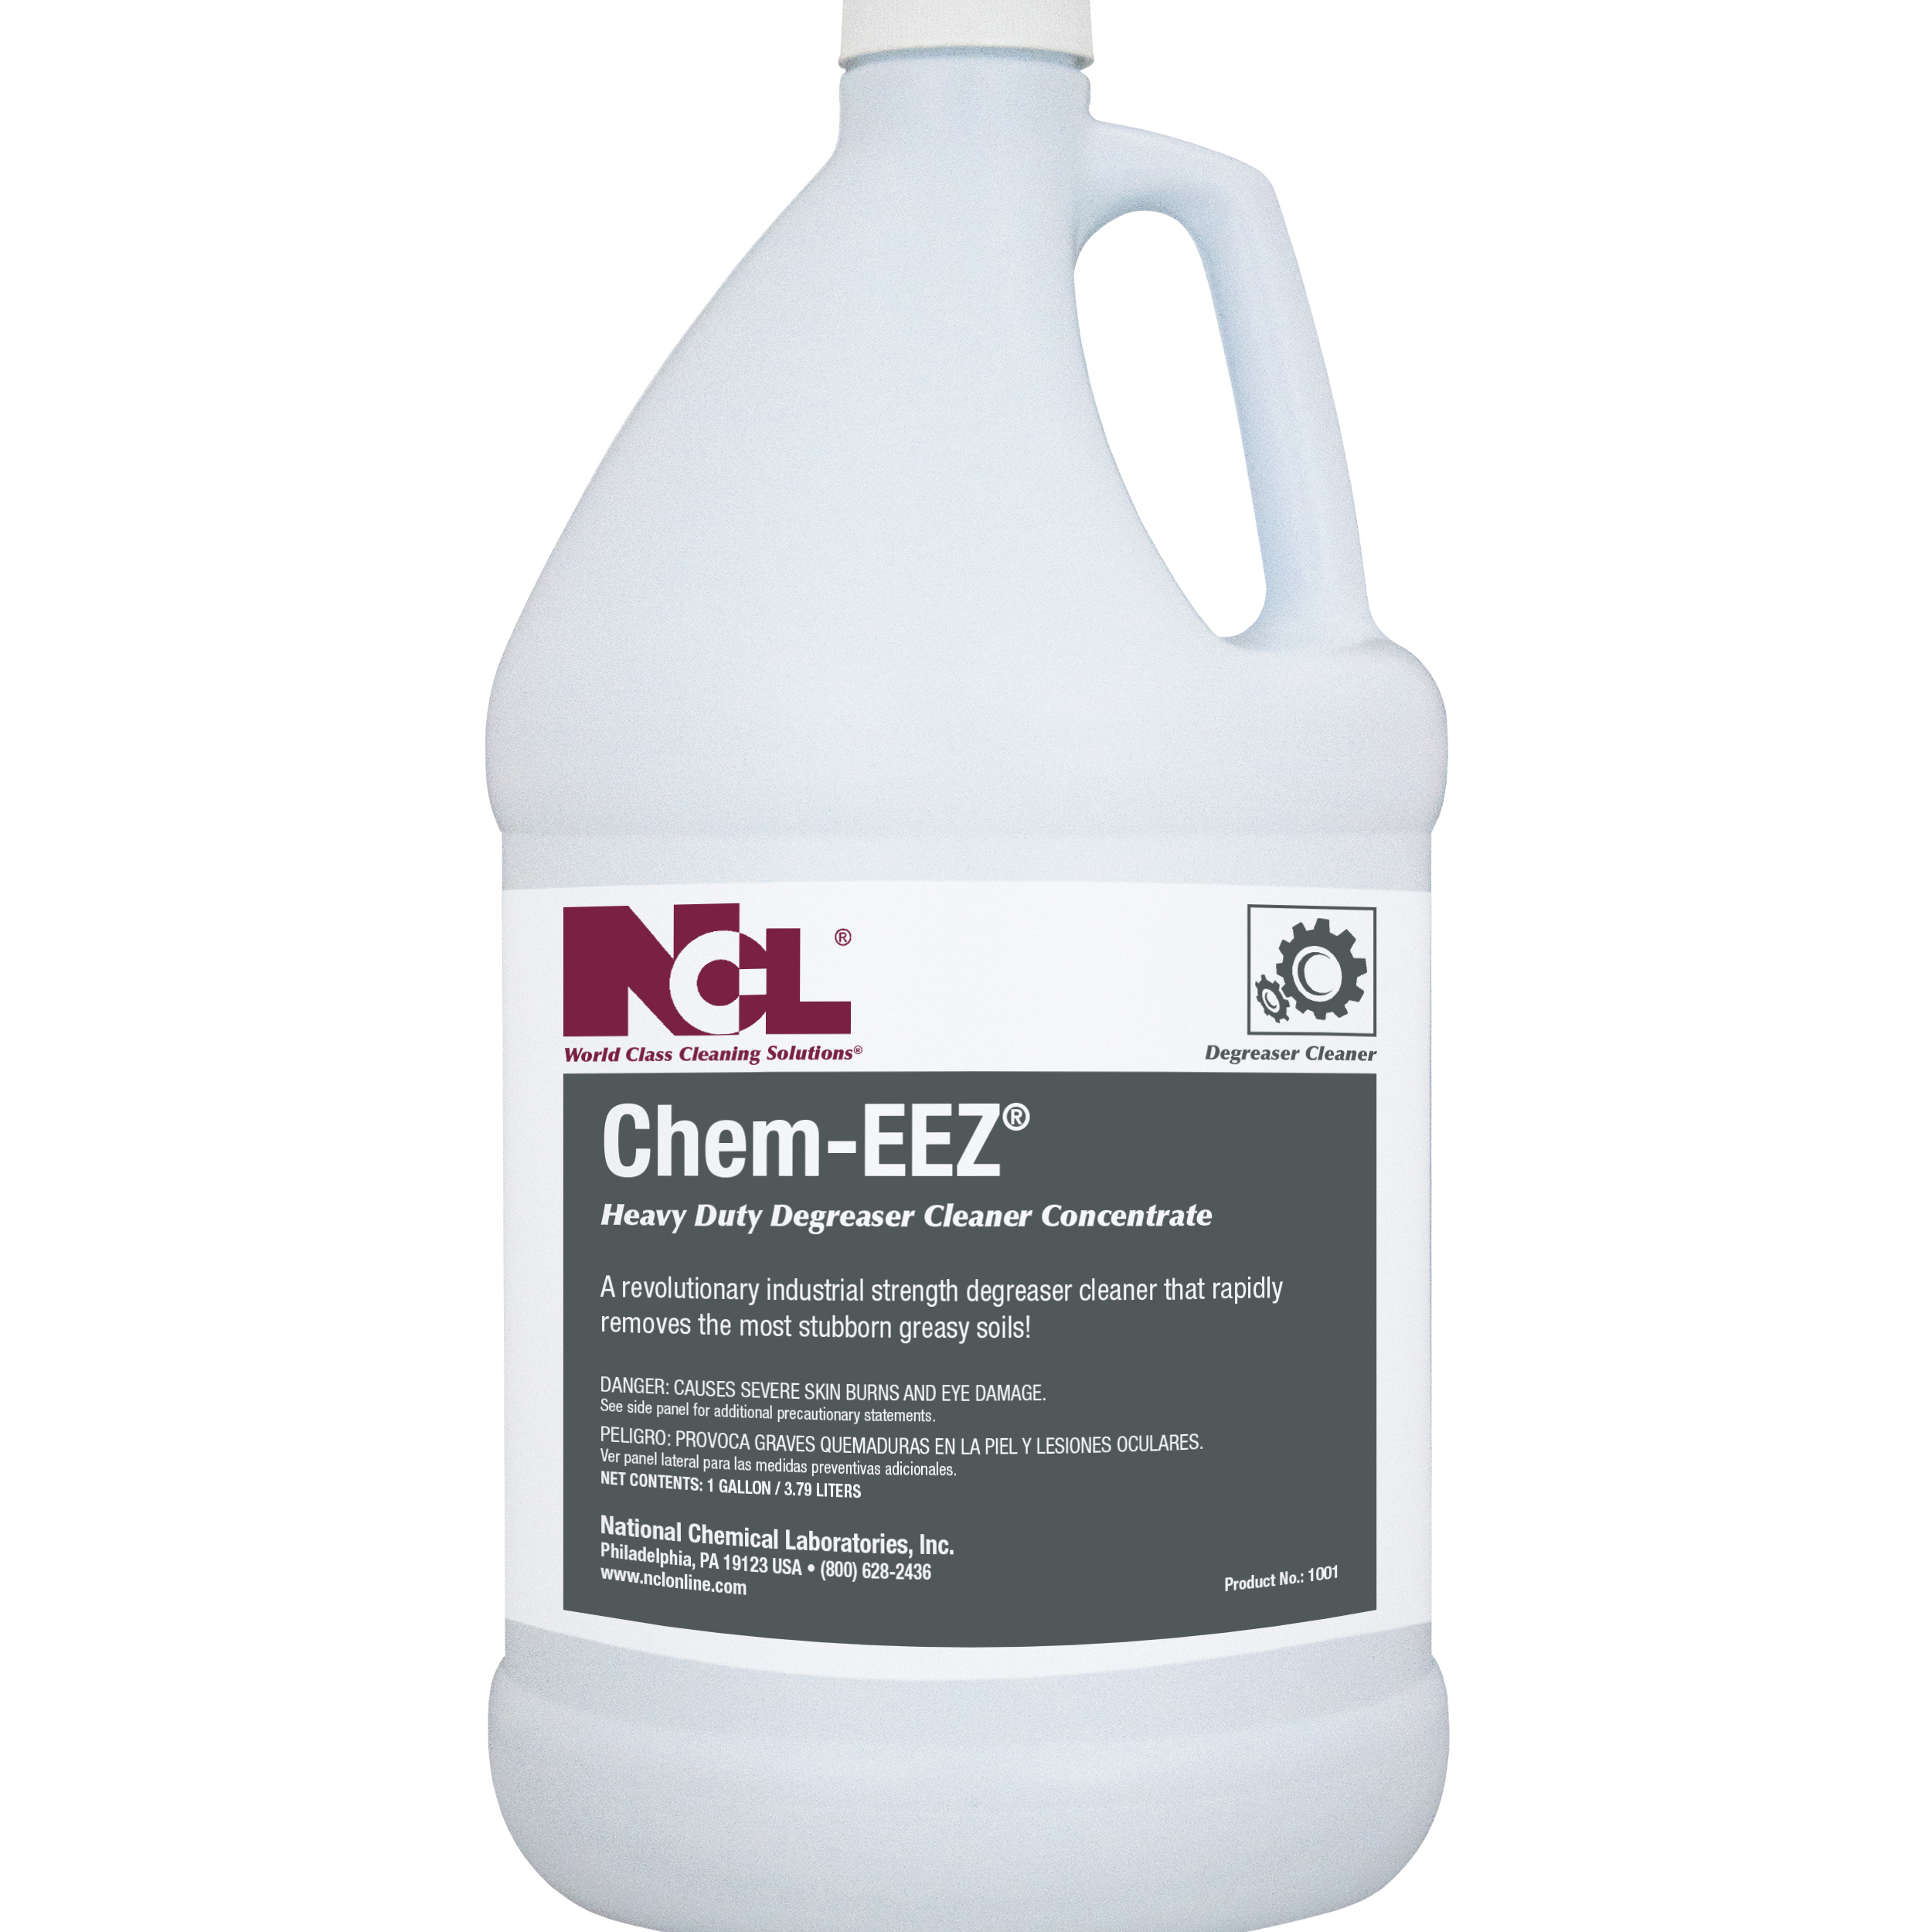  CHEM-EEZ Heavy Duty Degreaser Cleaner 4/1 Gal. Case (NCL1001-29) 